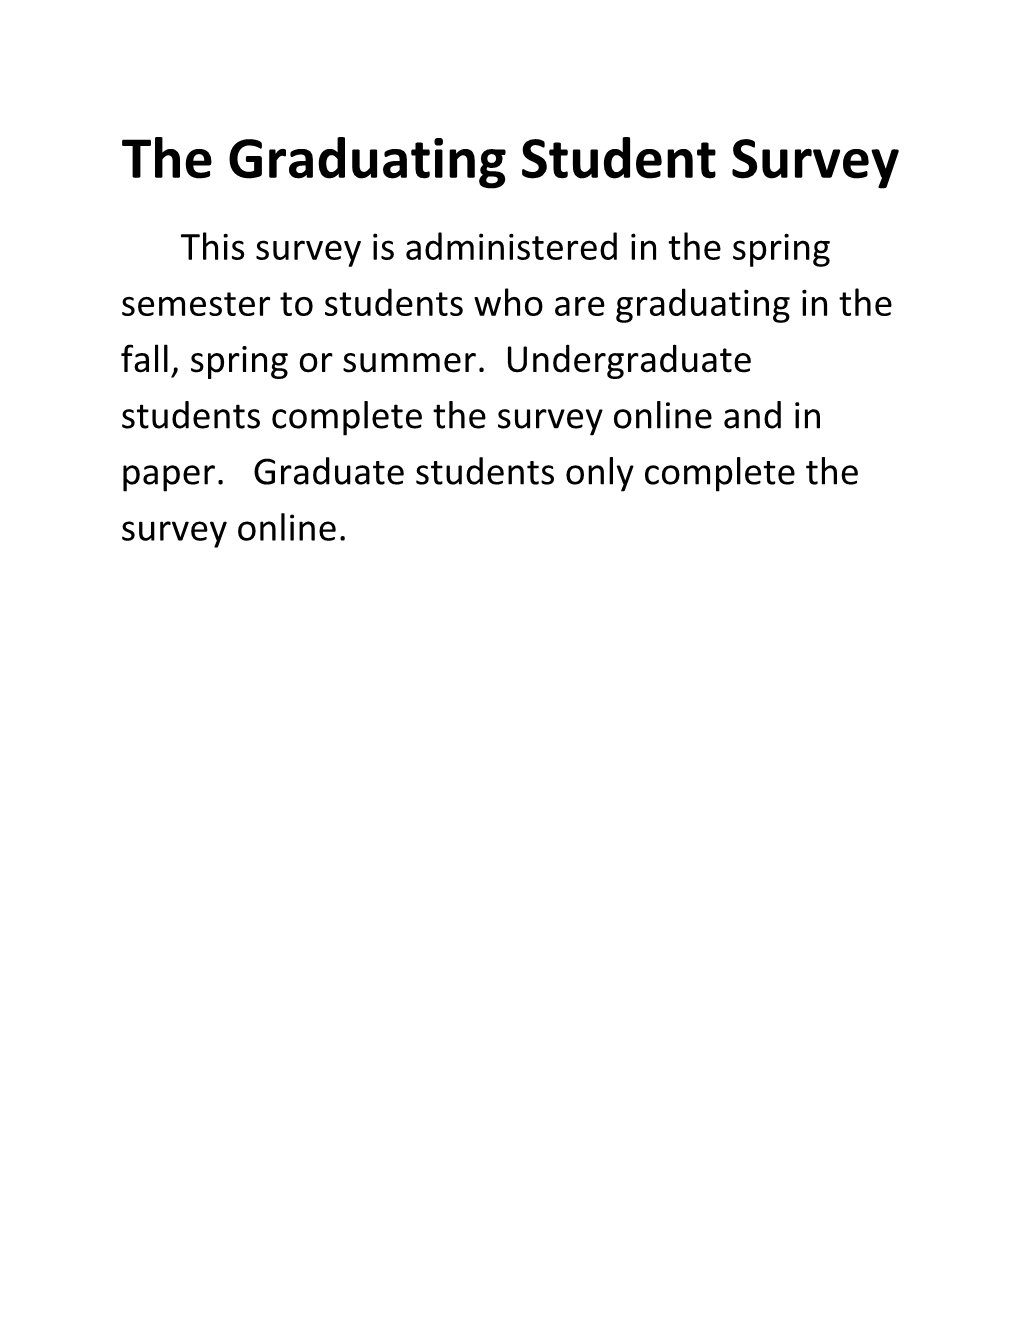 The Graduating Student Survey This Survey Is Administered in the Spring Semester to Students Who Are Graduating in the Fall, Spring Or Summer